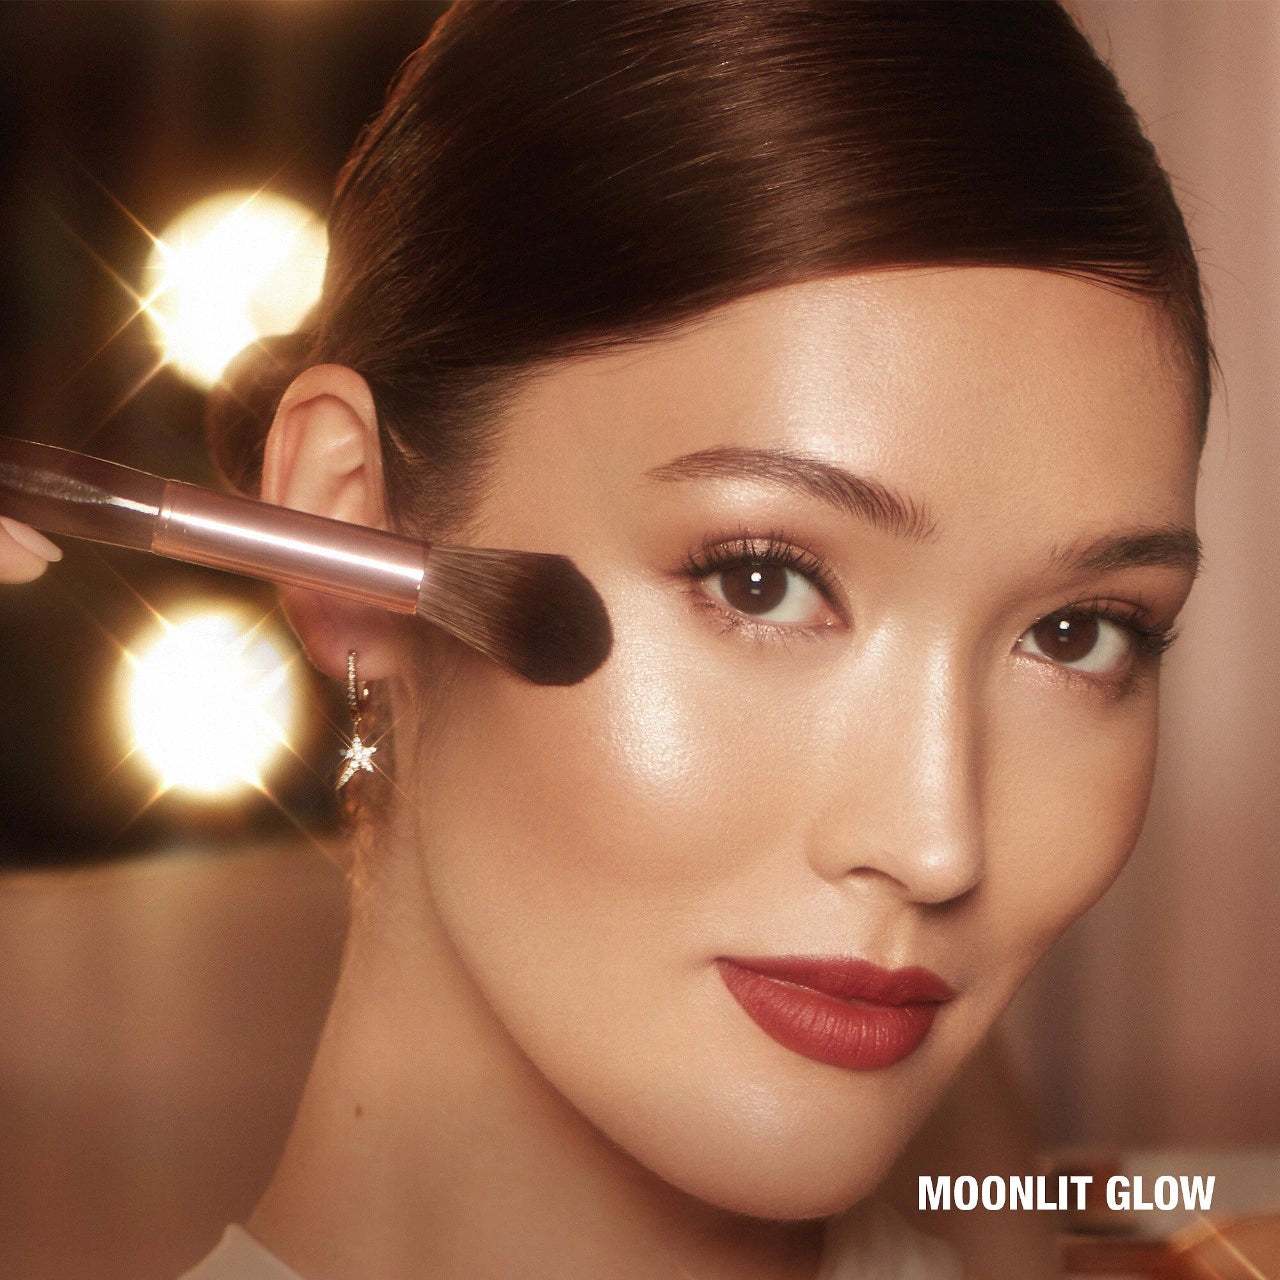 Charlotte Tilbury Glow Glide Face Architect Highlighter | Moonlit Glow